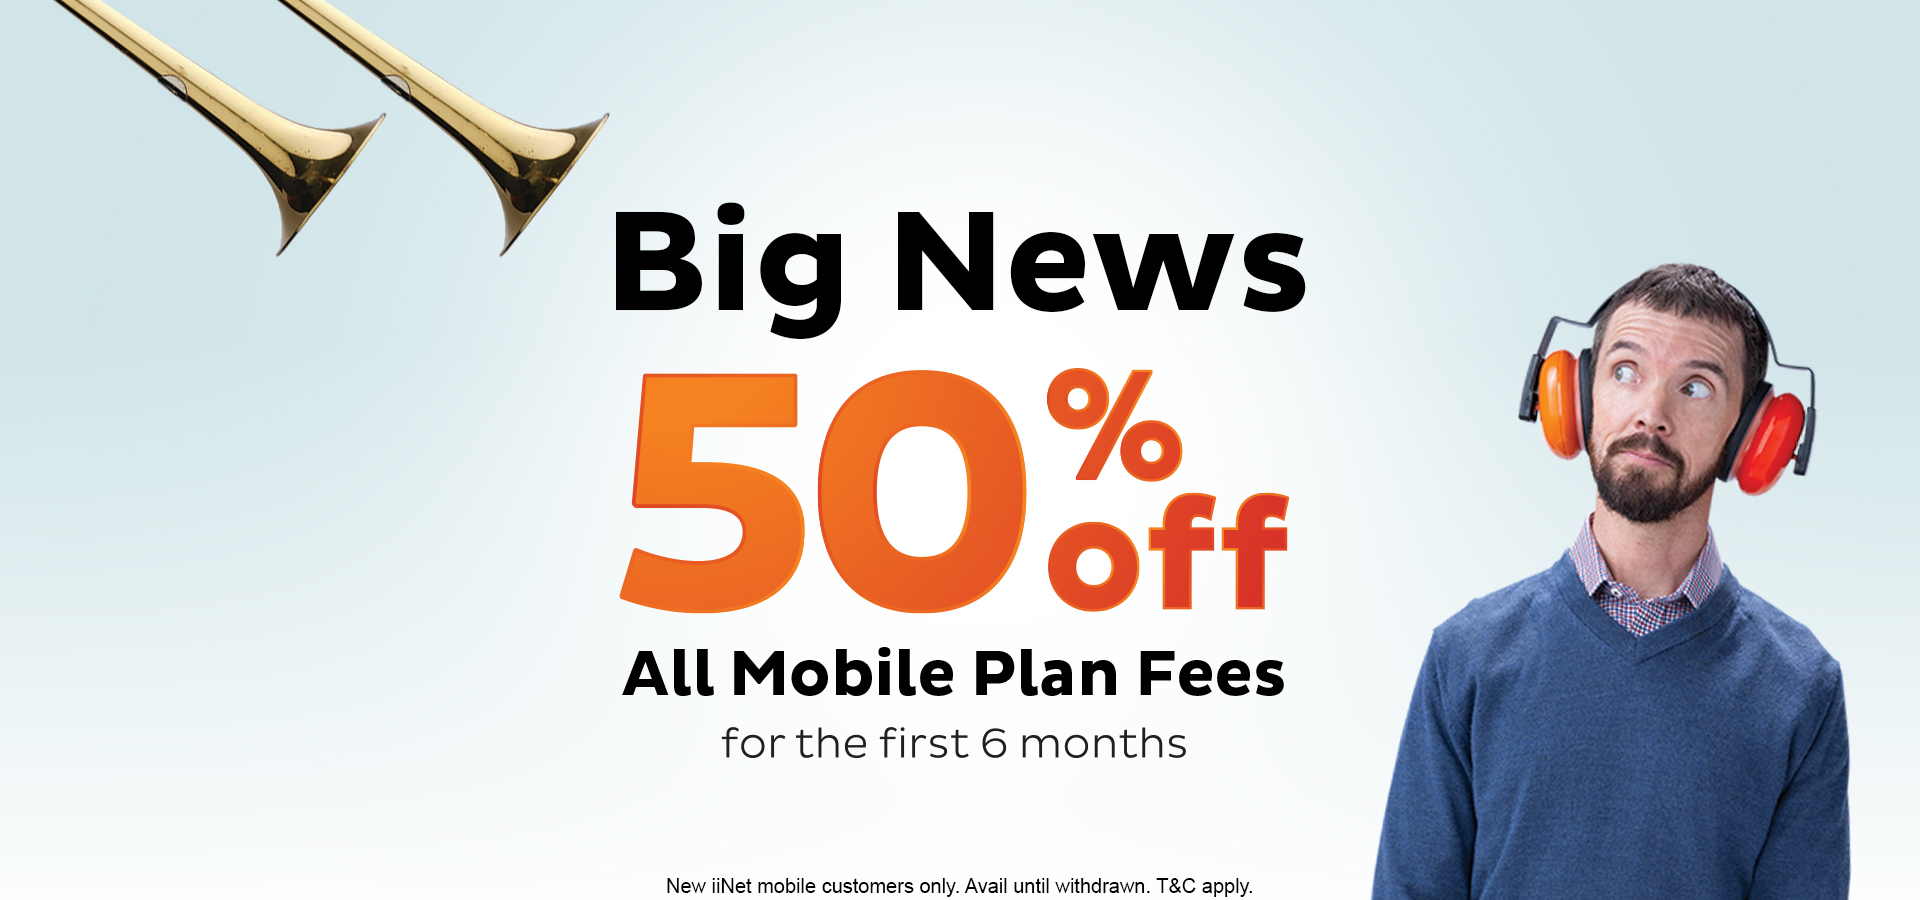 iiNet Mobile: 50% off all plan fees for the first 6 months.